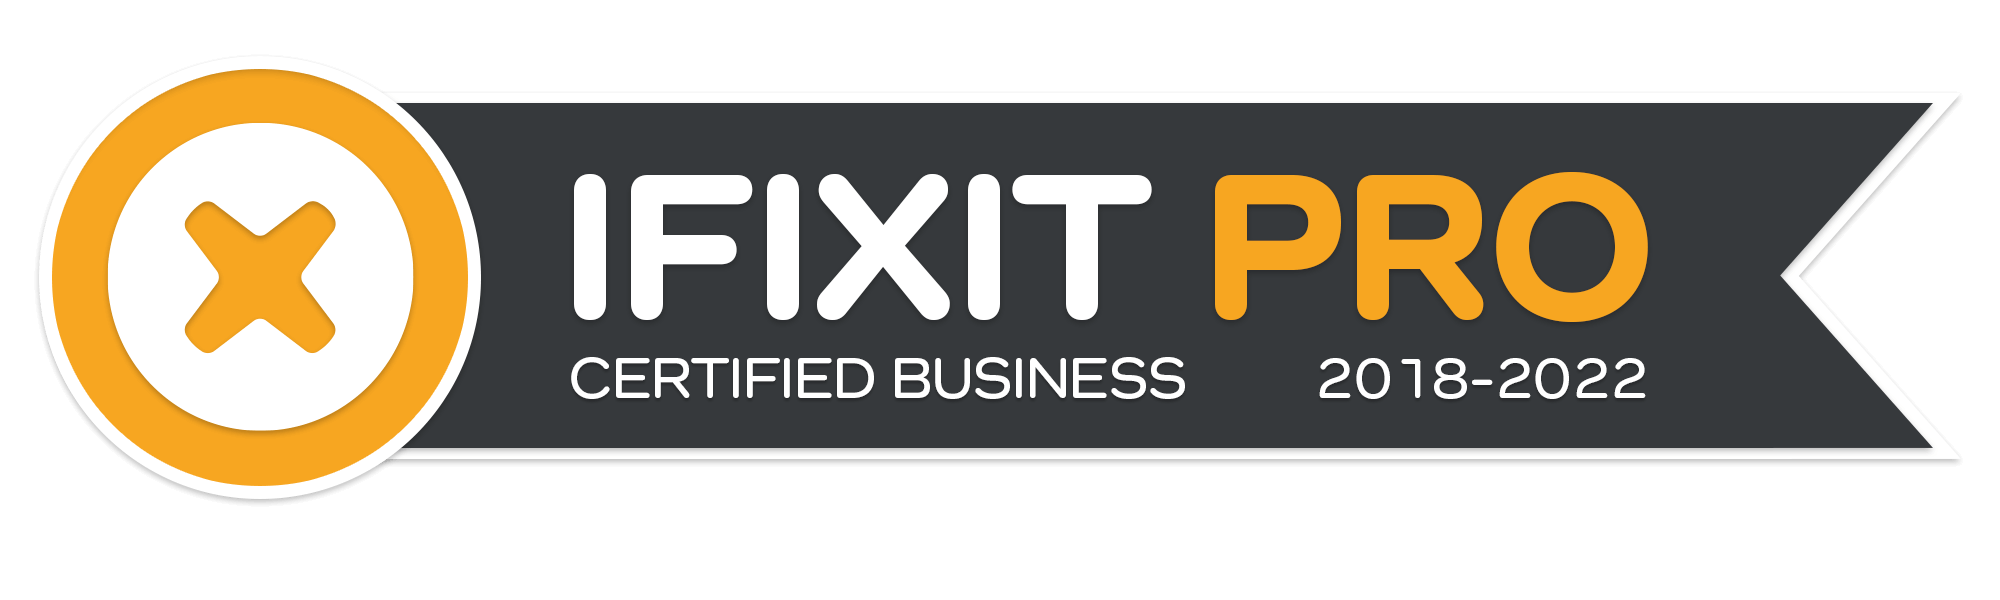 iFixIt Pro Certified Business Computer Repair